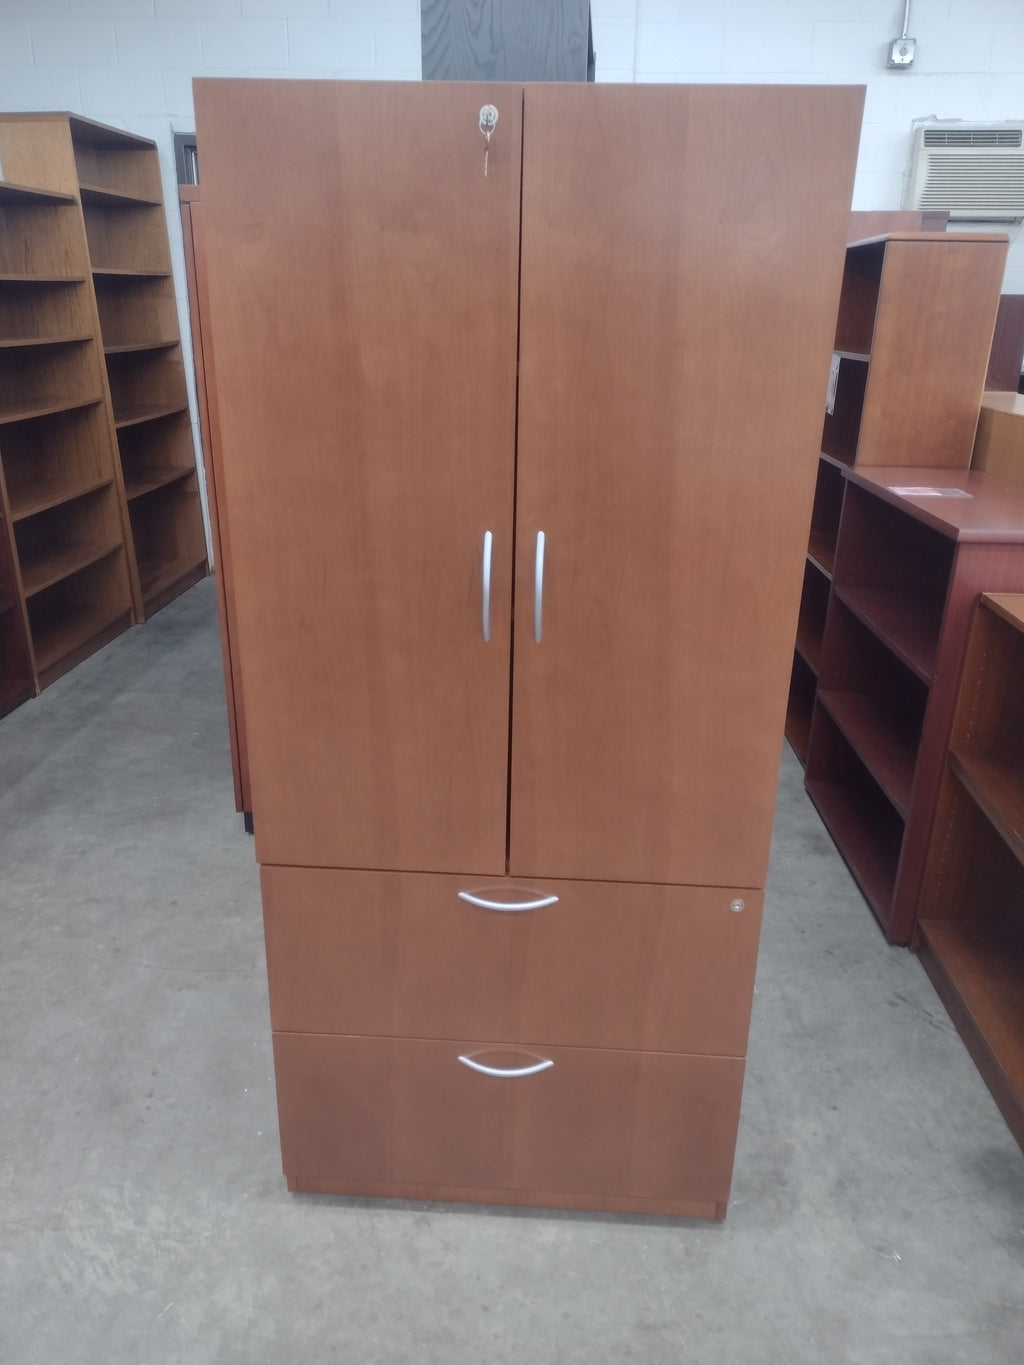 Pre-owned Cherry Veneer Storage Cabinet/Lateral File Combo - 30"W x 25"D x 67"H